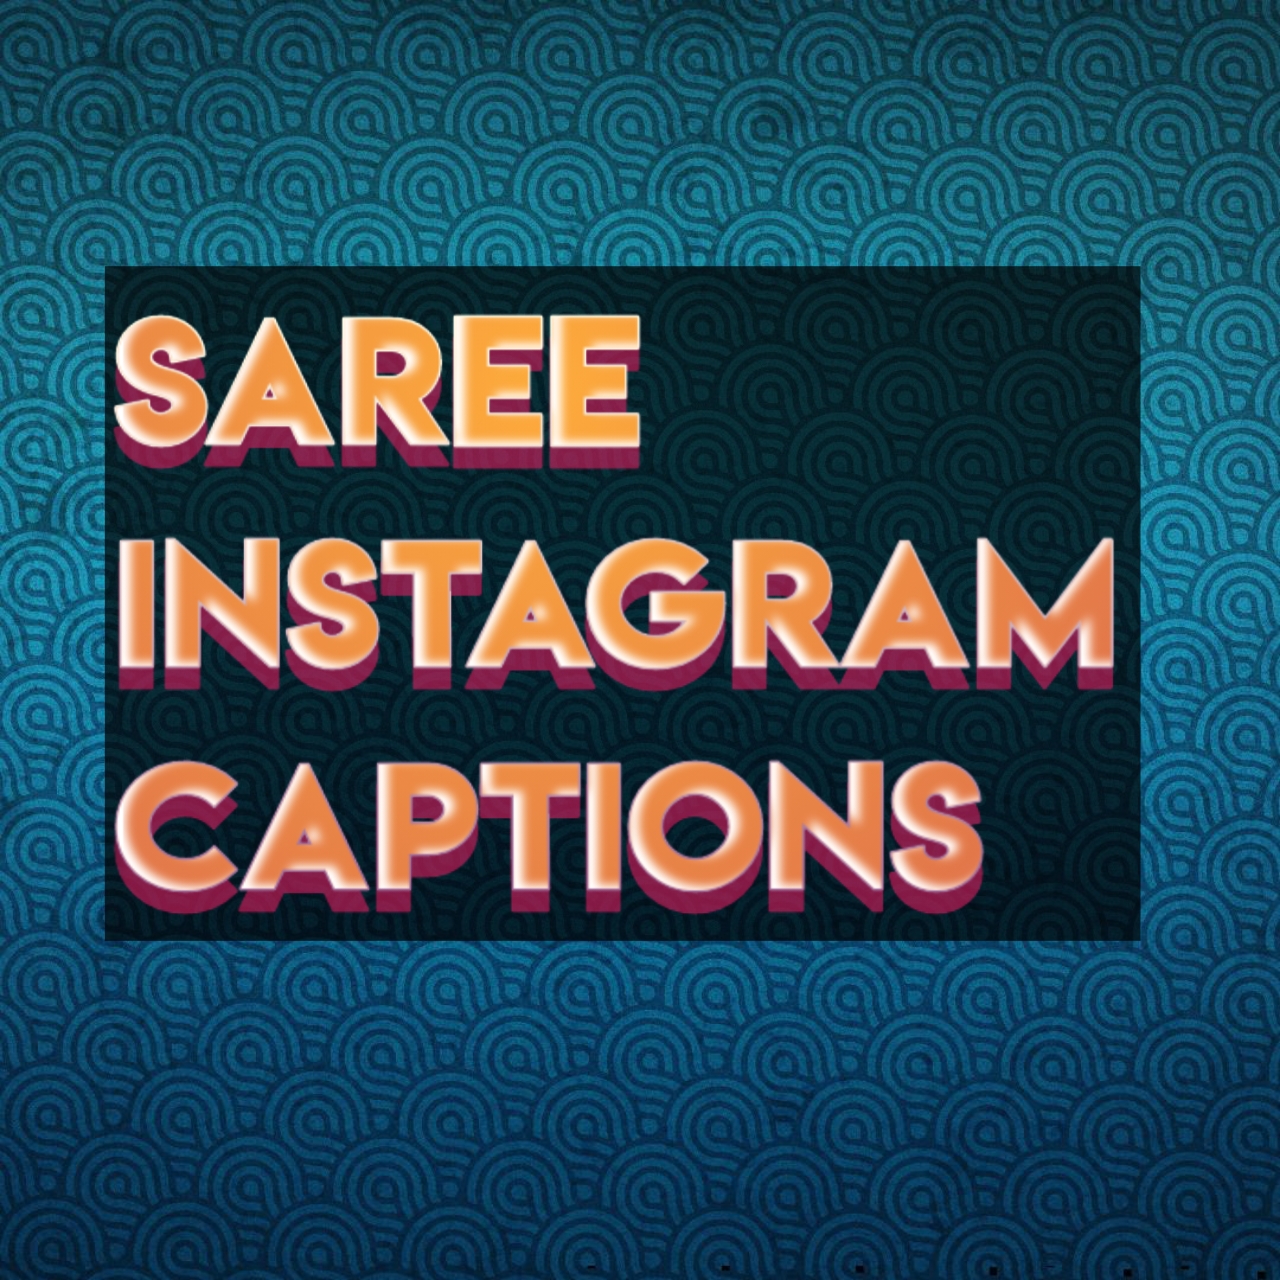 50 Saree Quotes For Instagram: Caption For Traditional Look For Instagram |  Caption for saree, Saree quotes, Fashion quotes inspirational